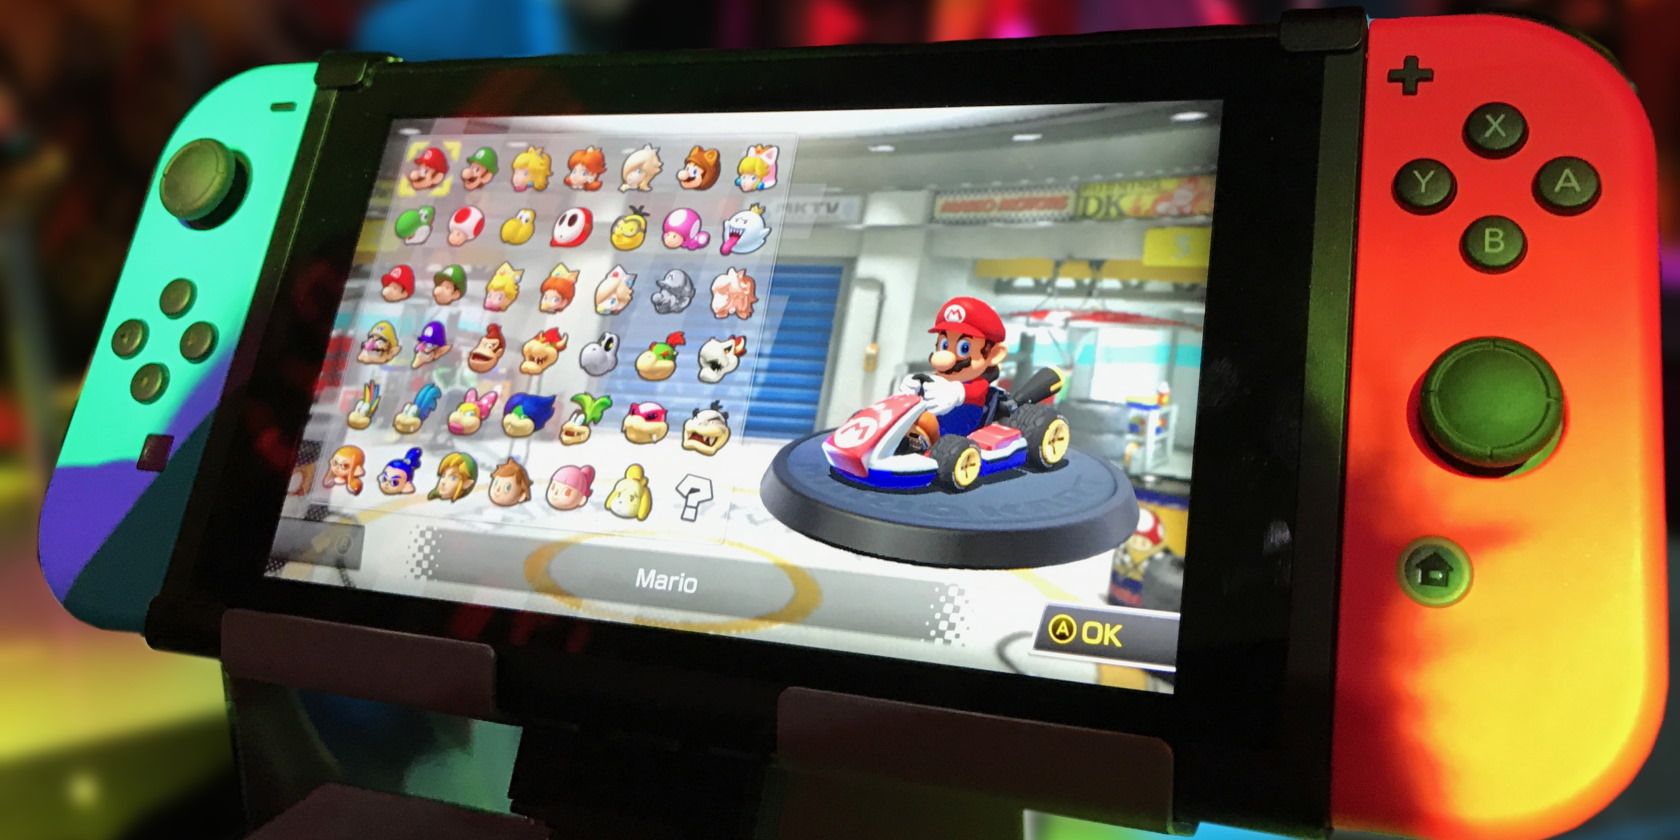 Yes, You Can Connect Nintendo Switch to a TV Without the Dock - Here's How